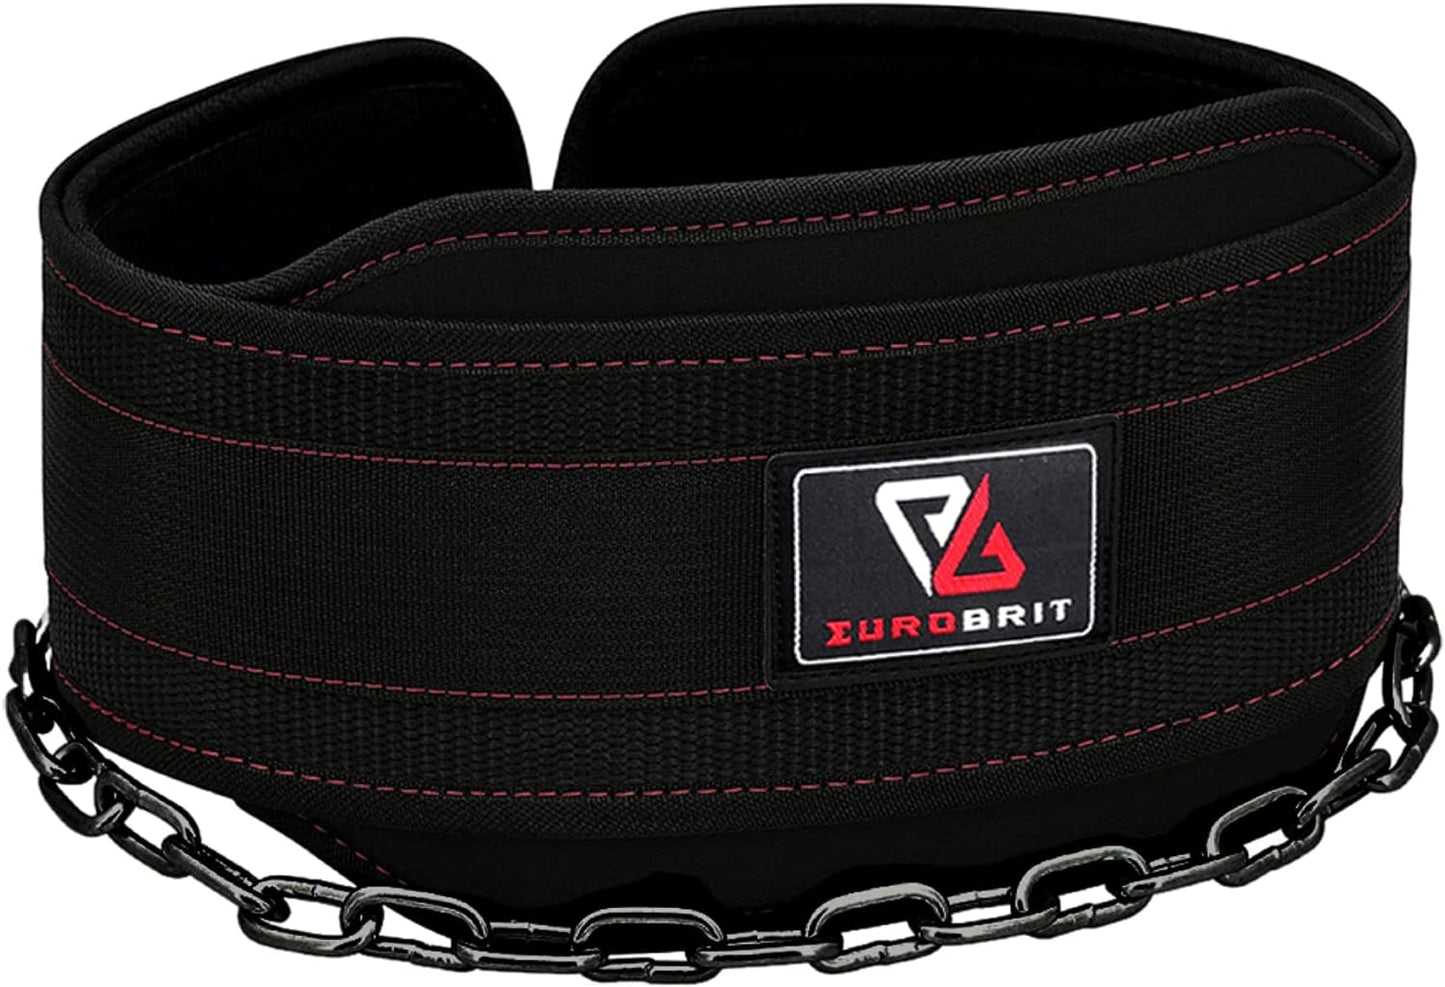 EURO BRIT Dip Belt with 36 Inches Heavy Duty Lifting Chain